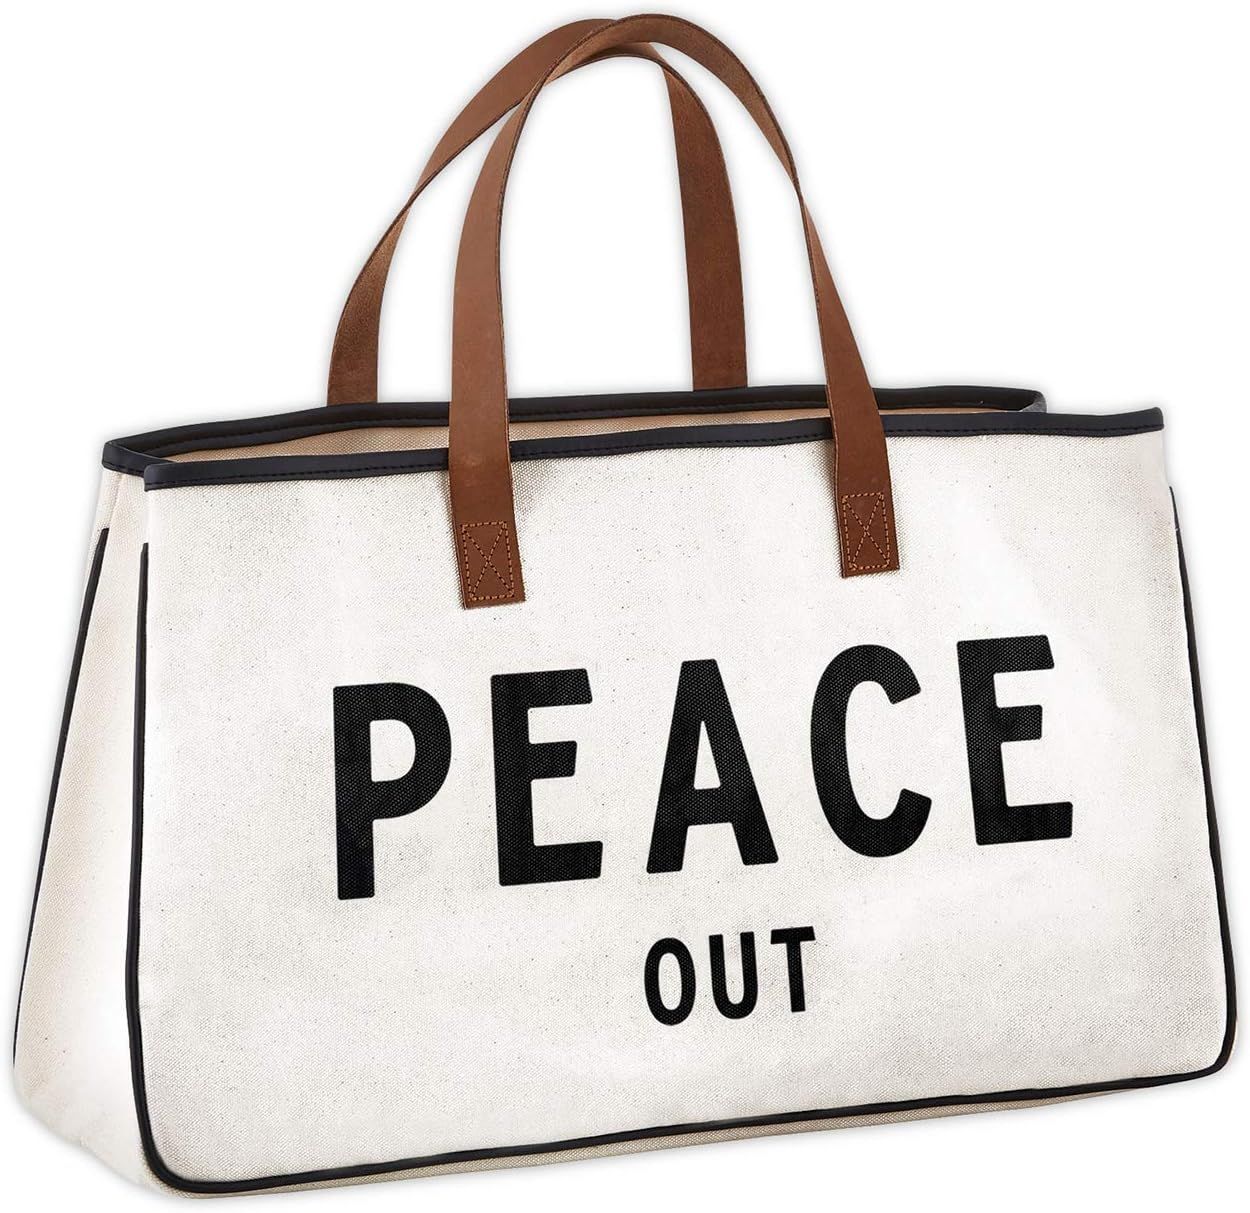 Santa Barbara Design Studio Hold Everything Tote Bag, 20" x 11", Peace Out Black and White | Amazon (US)